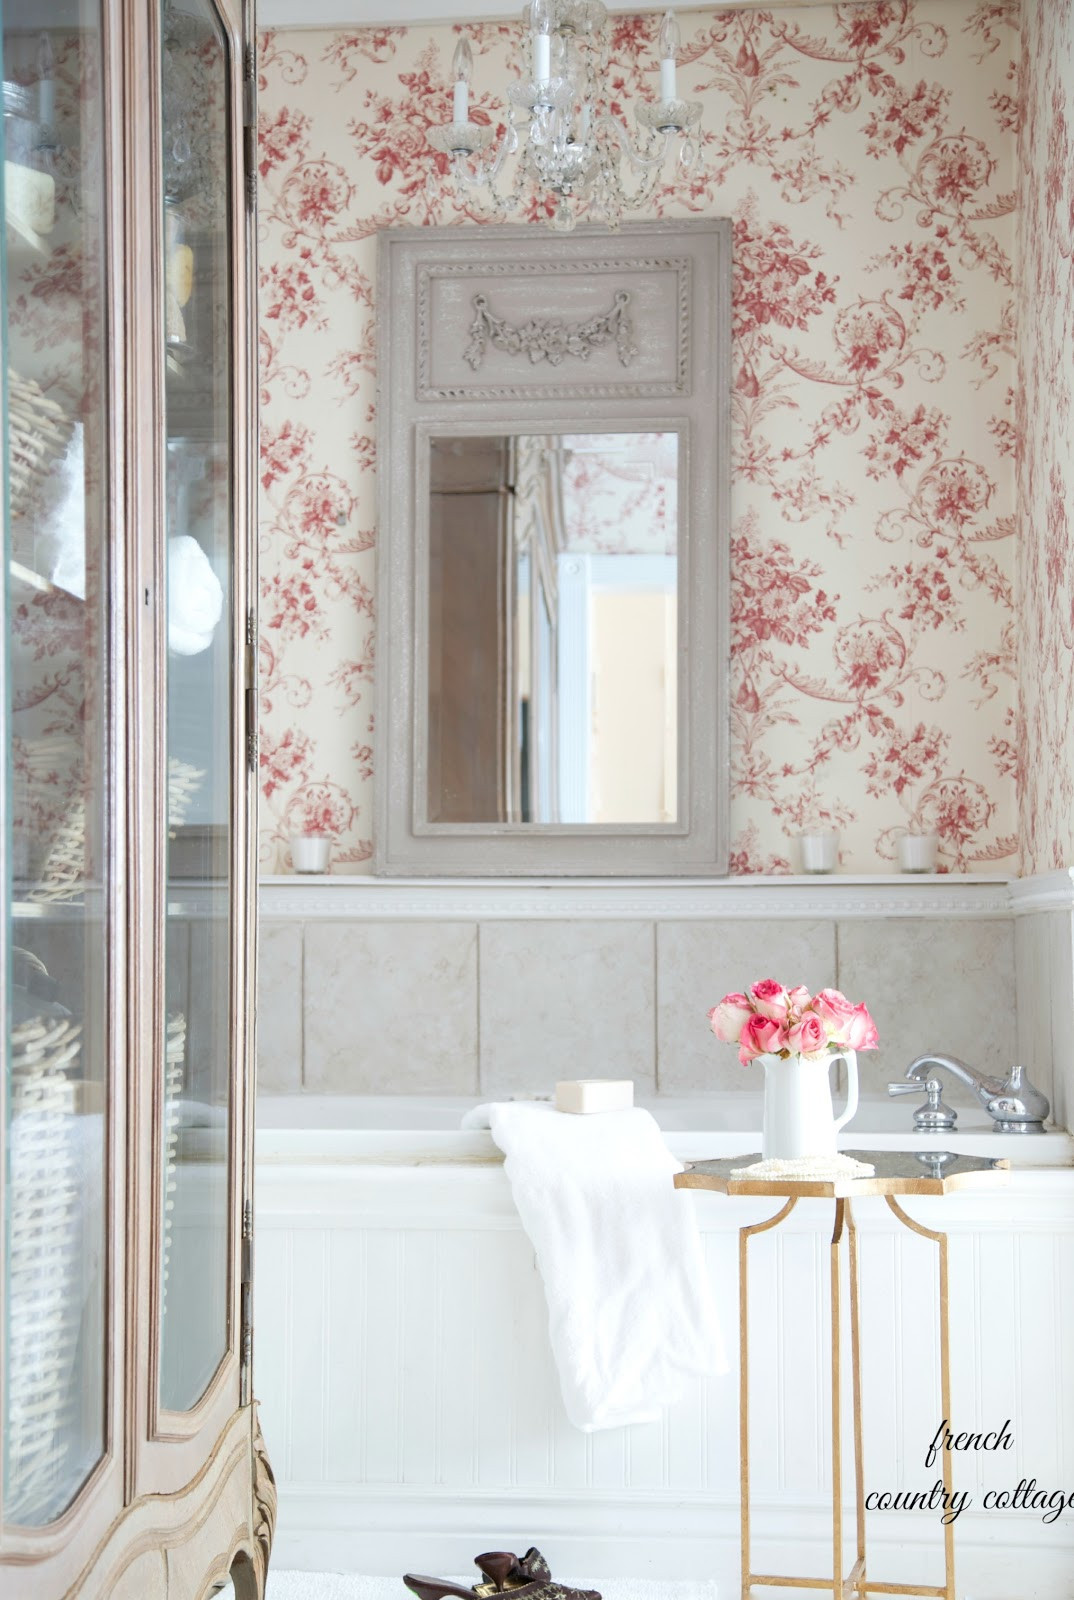 Best ideas about Bathroom In French
. Save or Pin Changes in the bathroom FRENCH COUNTRY COTTAGE Now.